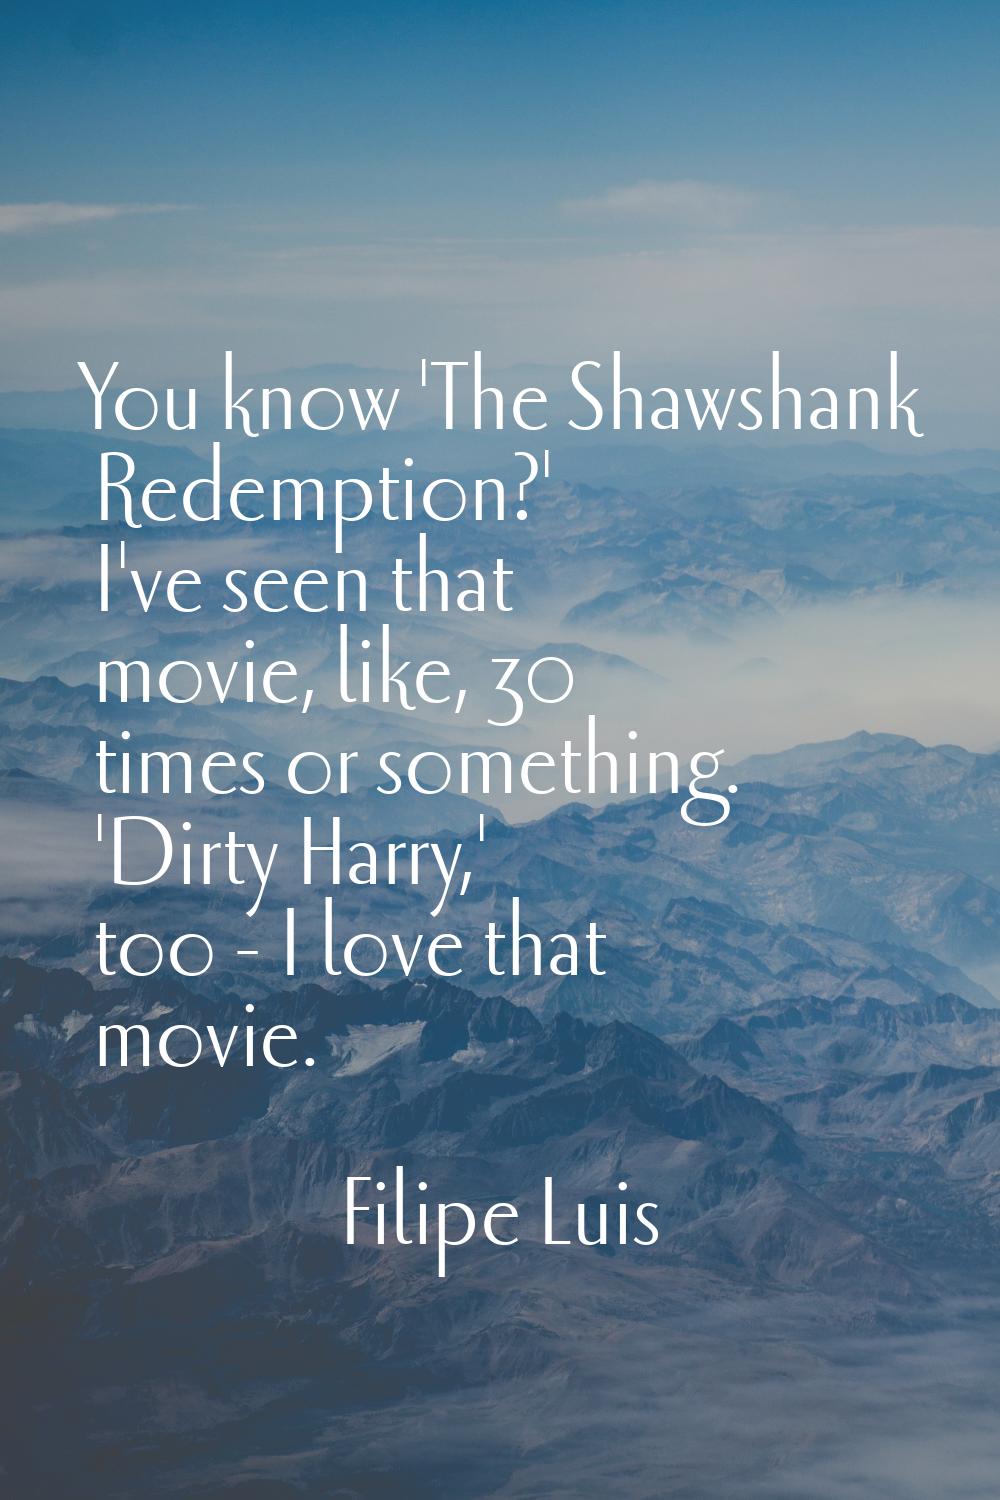 You know 'The Shawshank Redemption?' I've seen that movie, like, 30 times or something. 'Dirty Harr